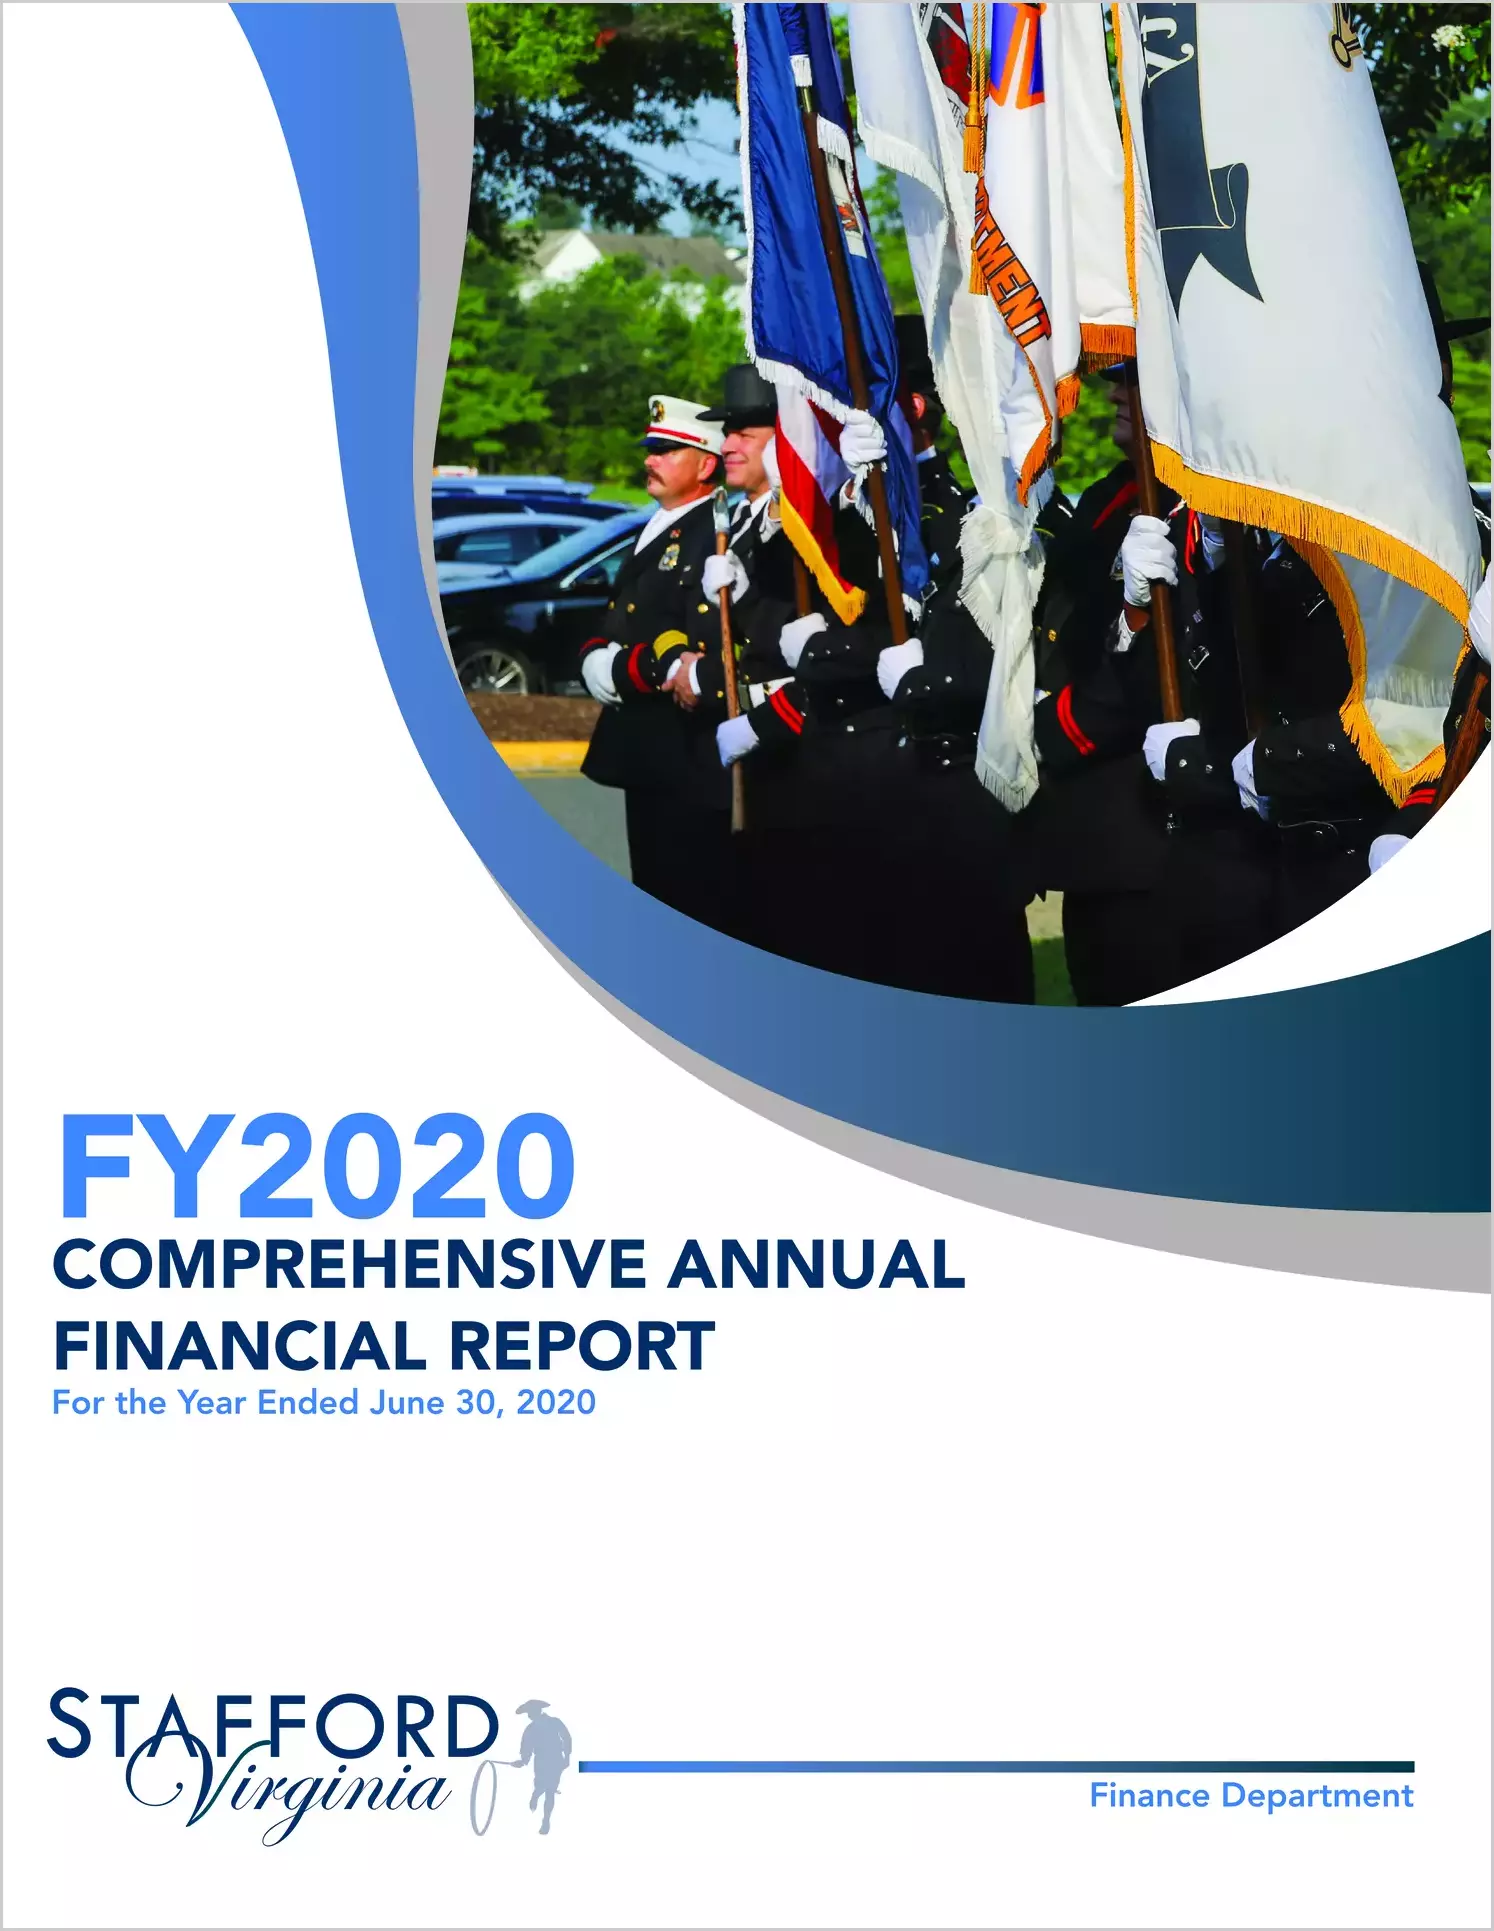 2020 Annual Financial Report for County of Stafford